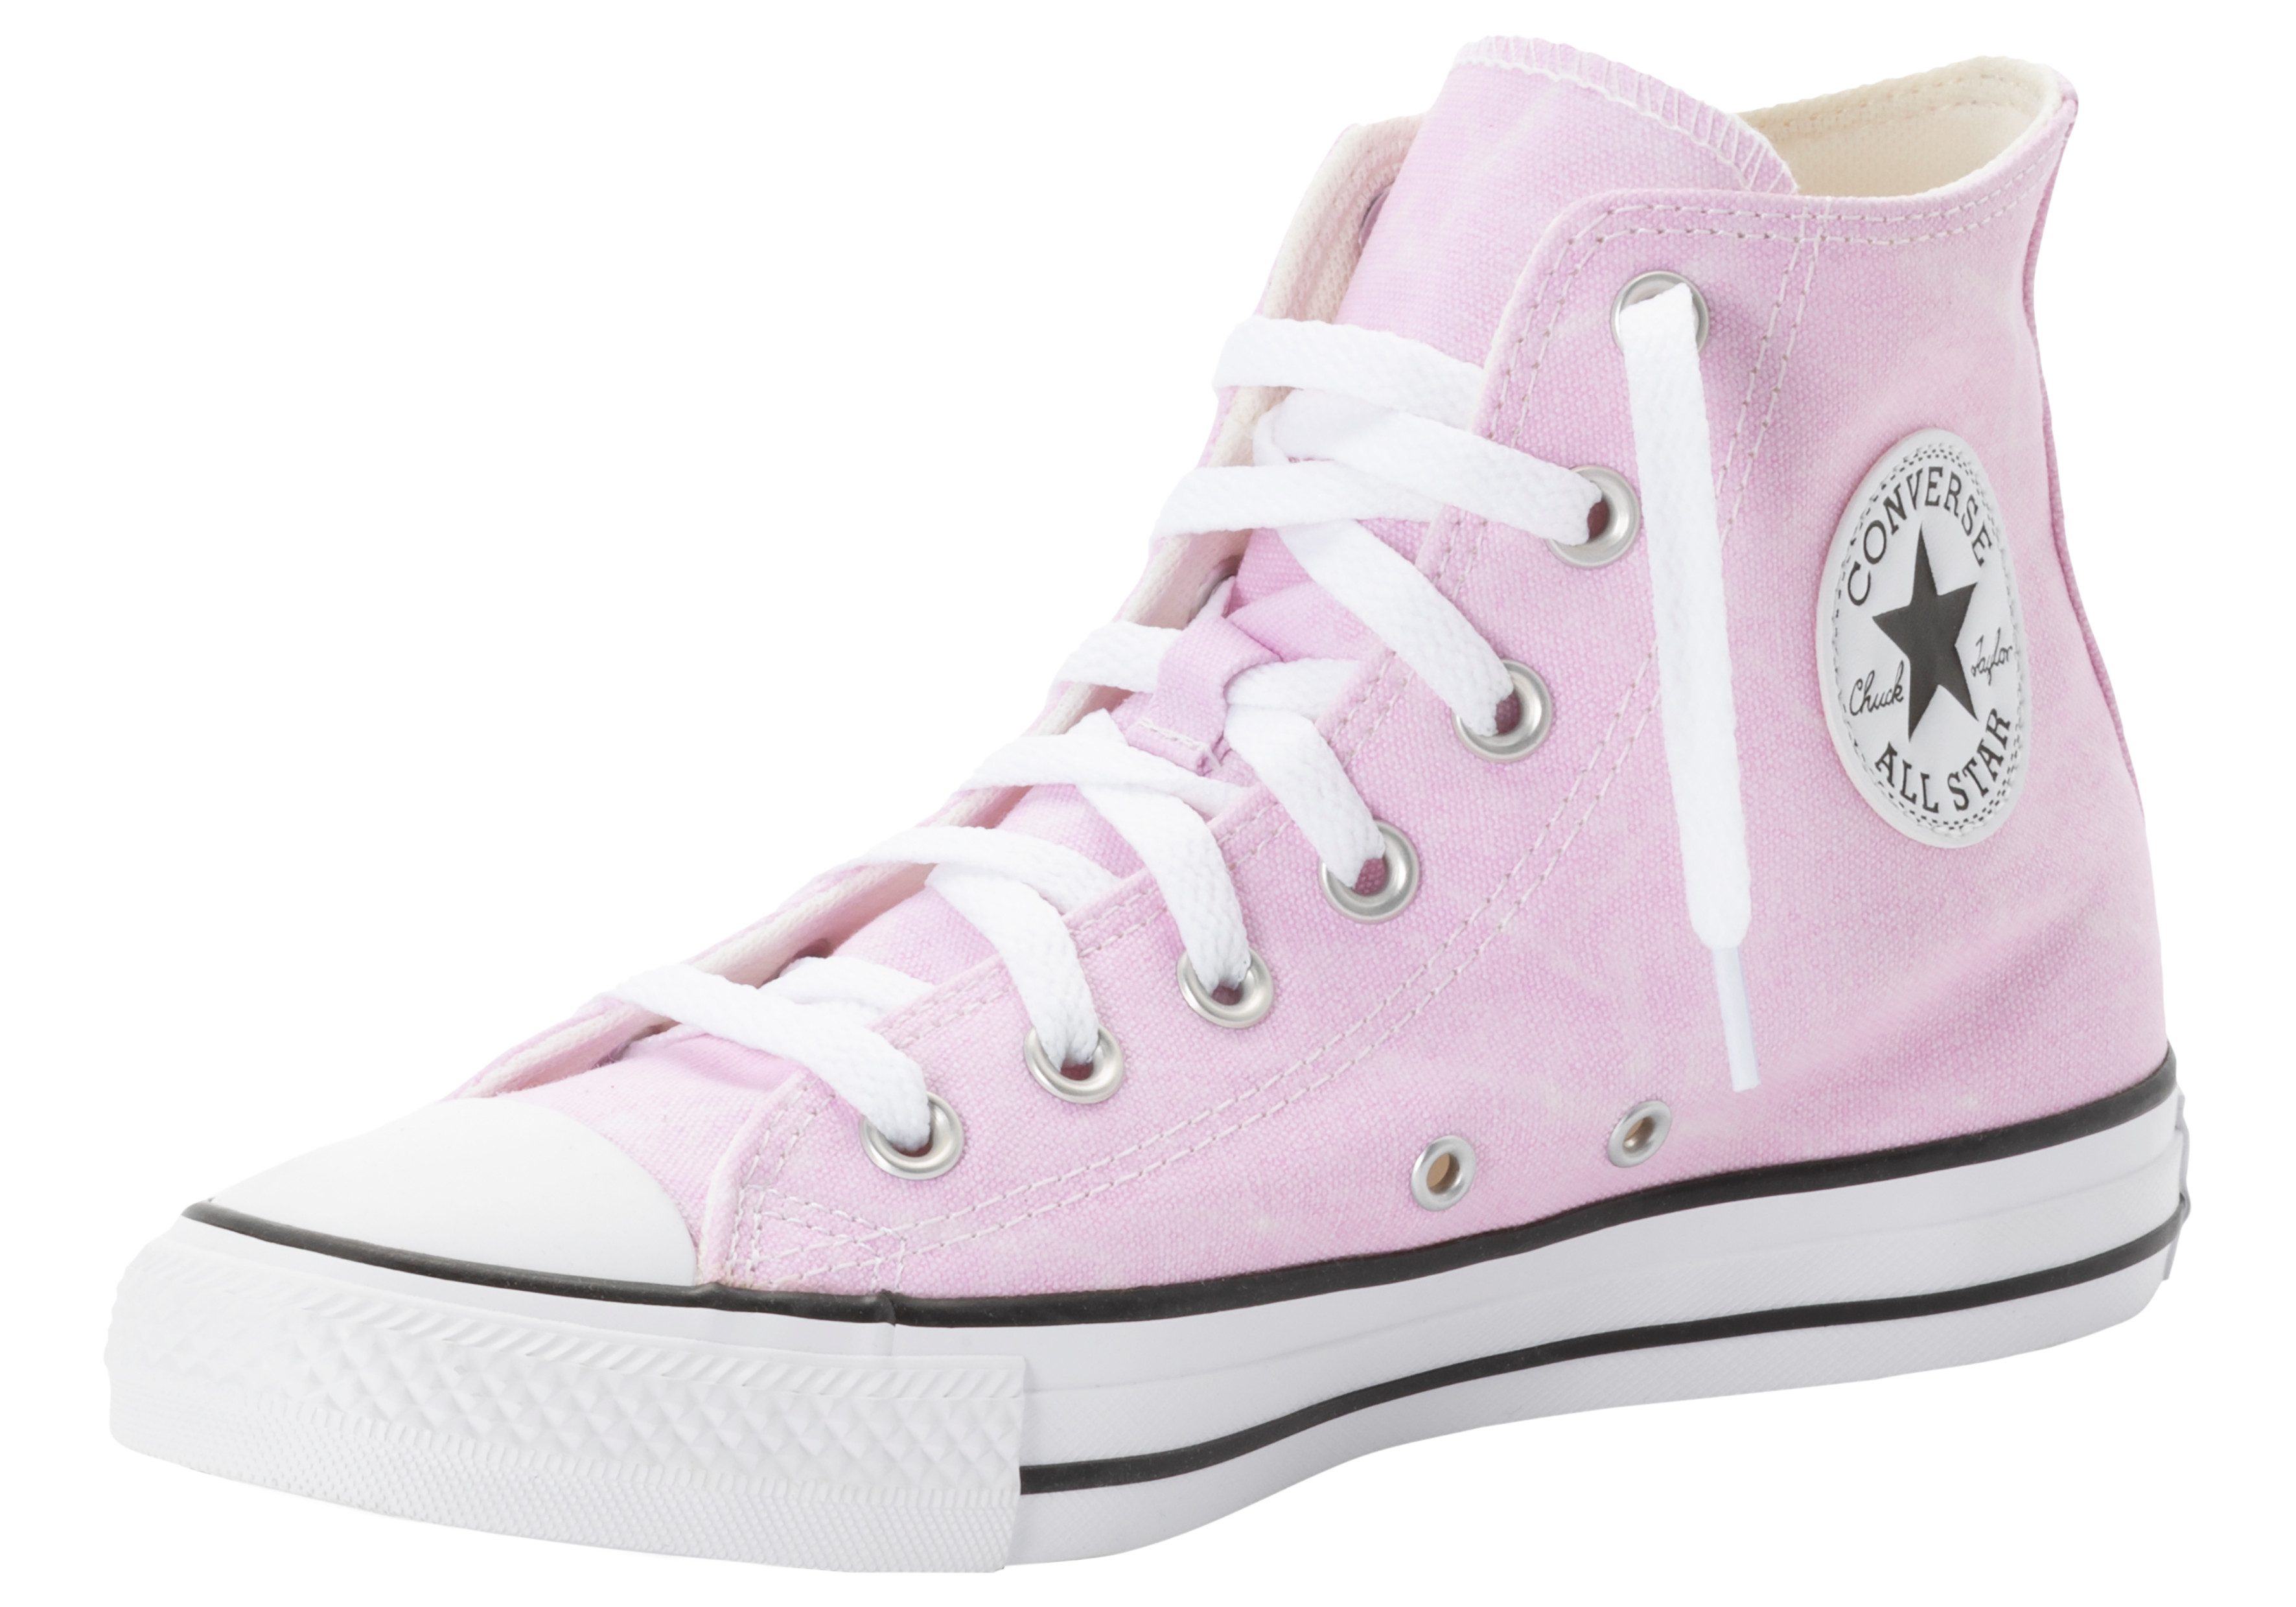 Converse CHUCK TAYLOR ALL STAR WASHED CANVAS Sneaker